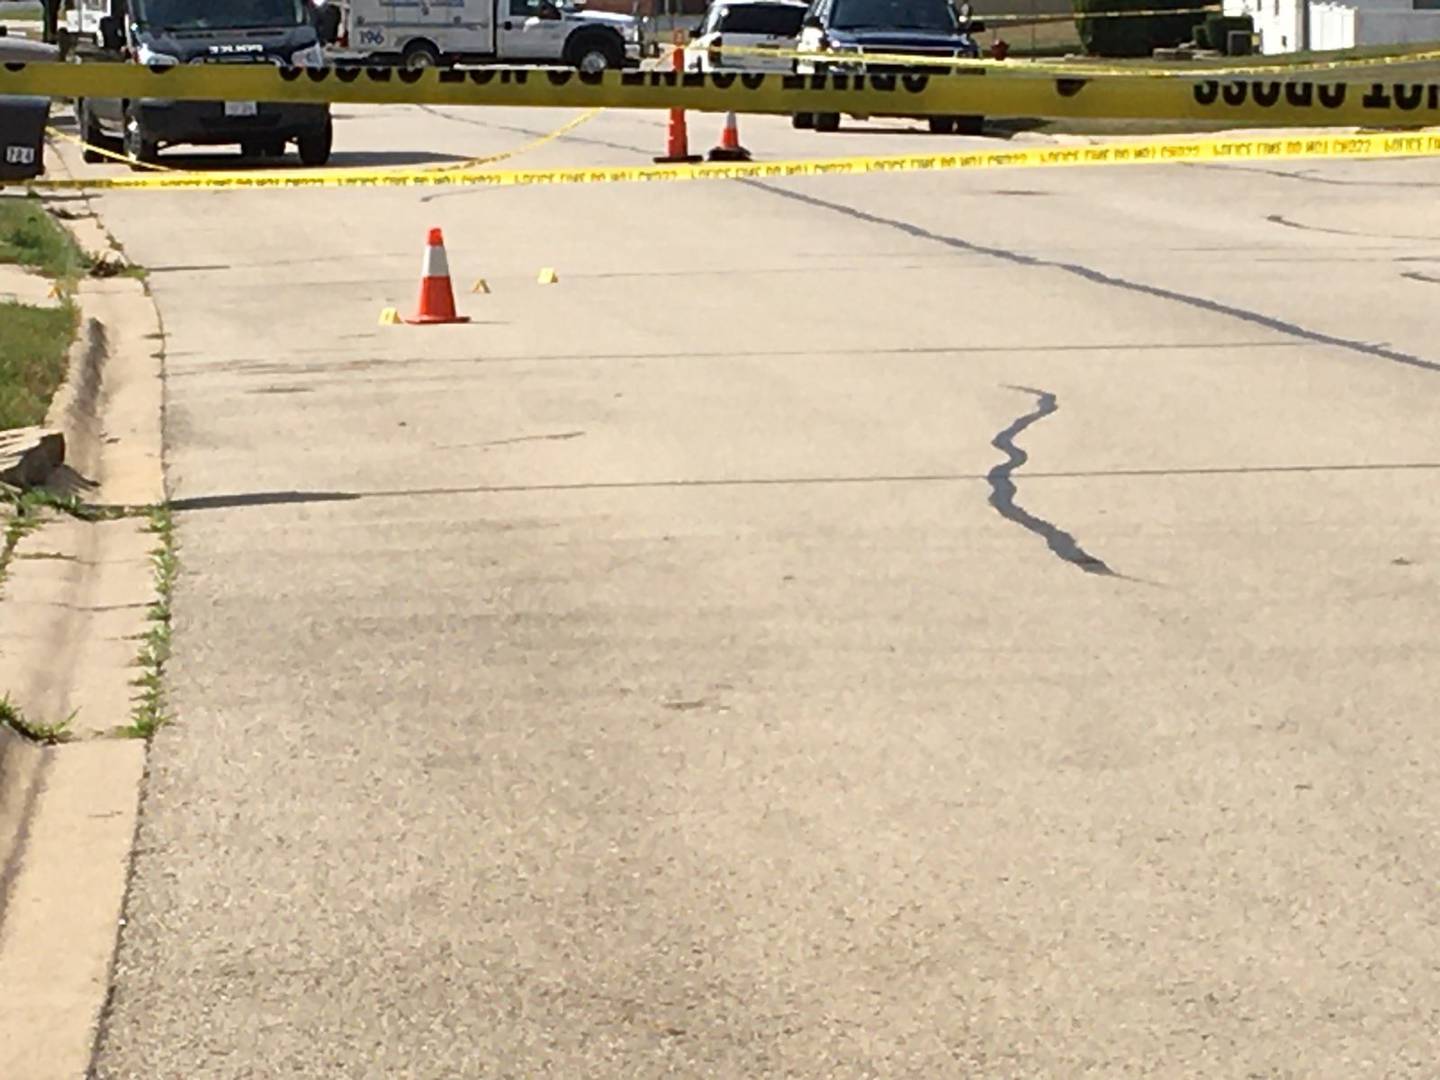 An area of Honeytree Drive in Romeoville was taped off by police on the morning of Friday, Aug. 27, 2021, for the investigation of the fatal shooting of 20-year-old Zamir Williams.